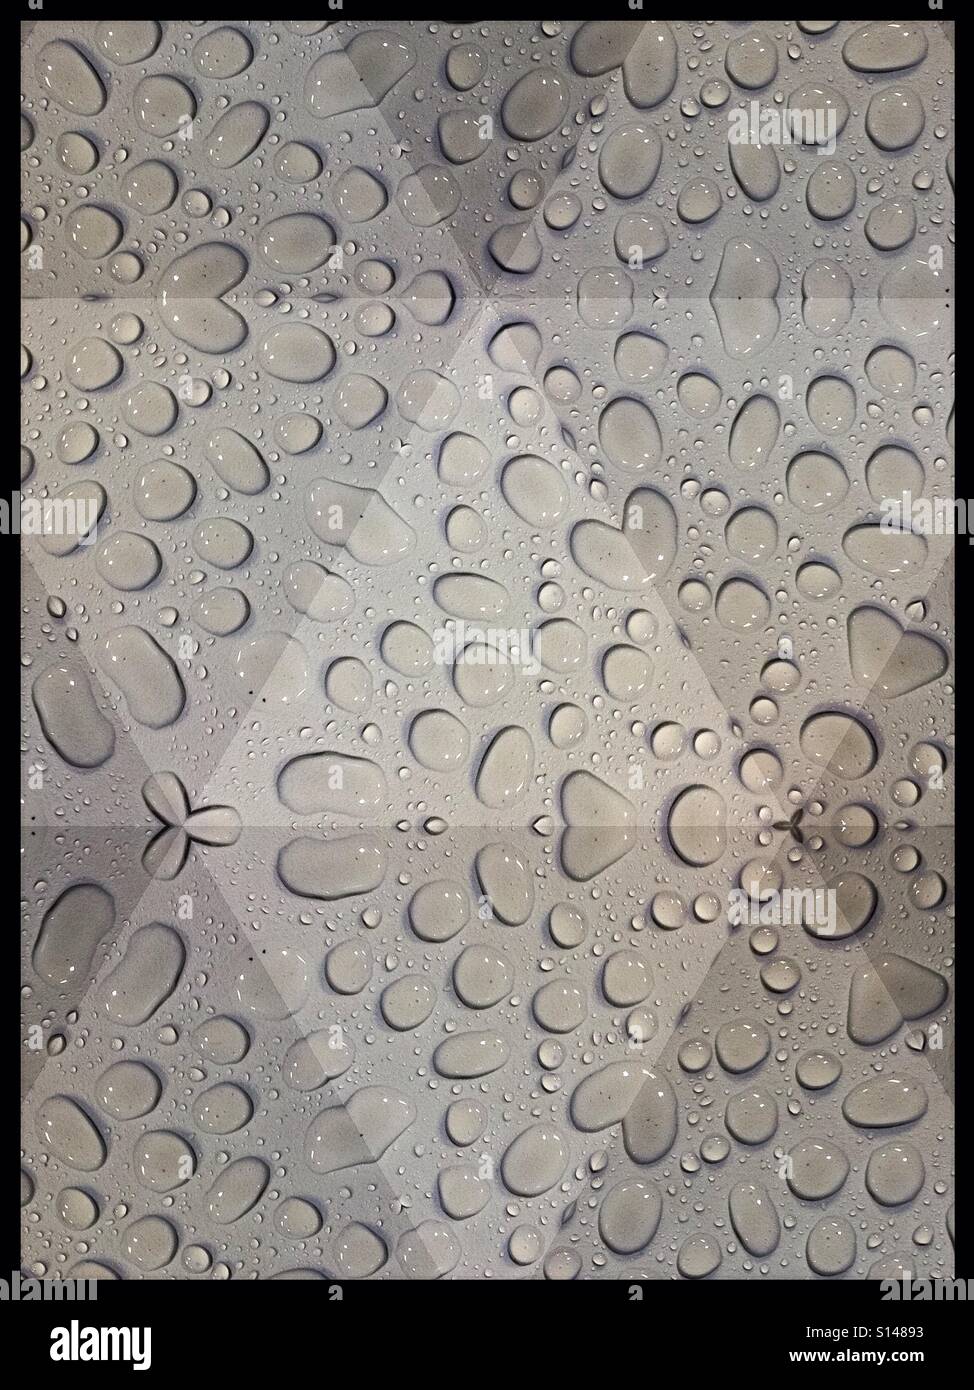 Mozaic effect applied to raindrops on a white table Stock Photo